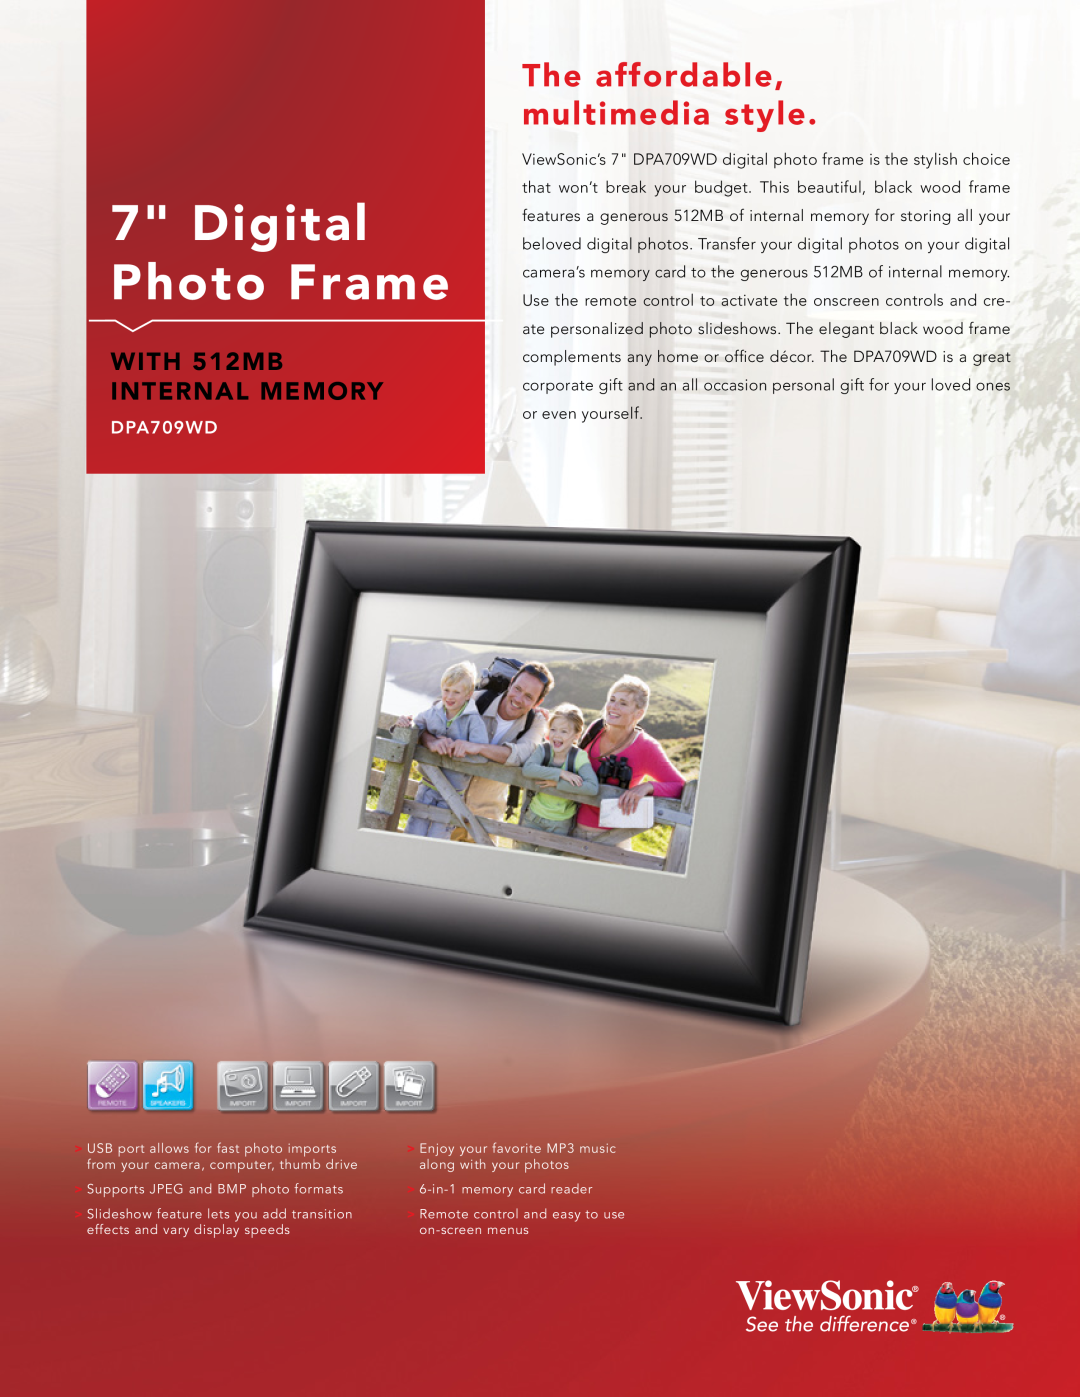 ViewSonic DPA709WD manual Digital Photo Frame, The affordable, multimedia style, WITH 512MB INTERNAL MEMORY 